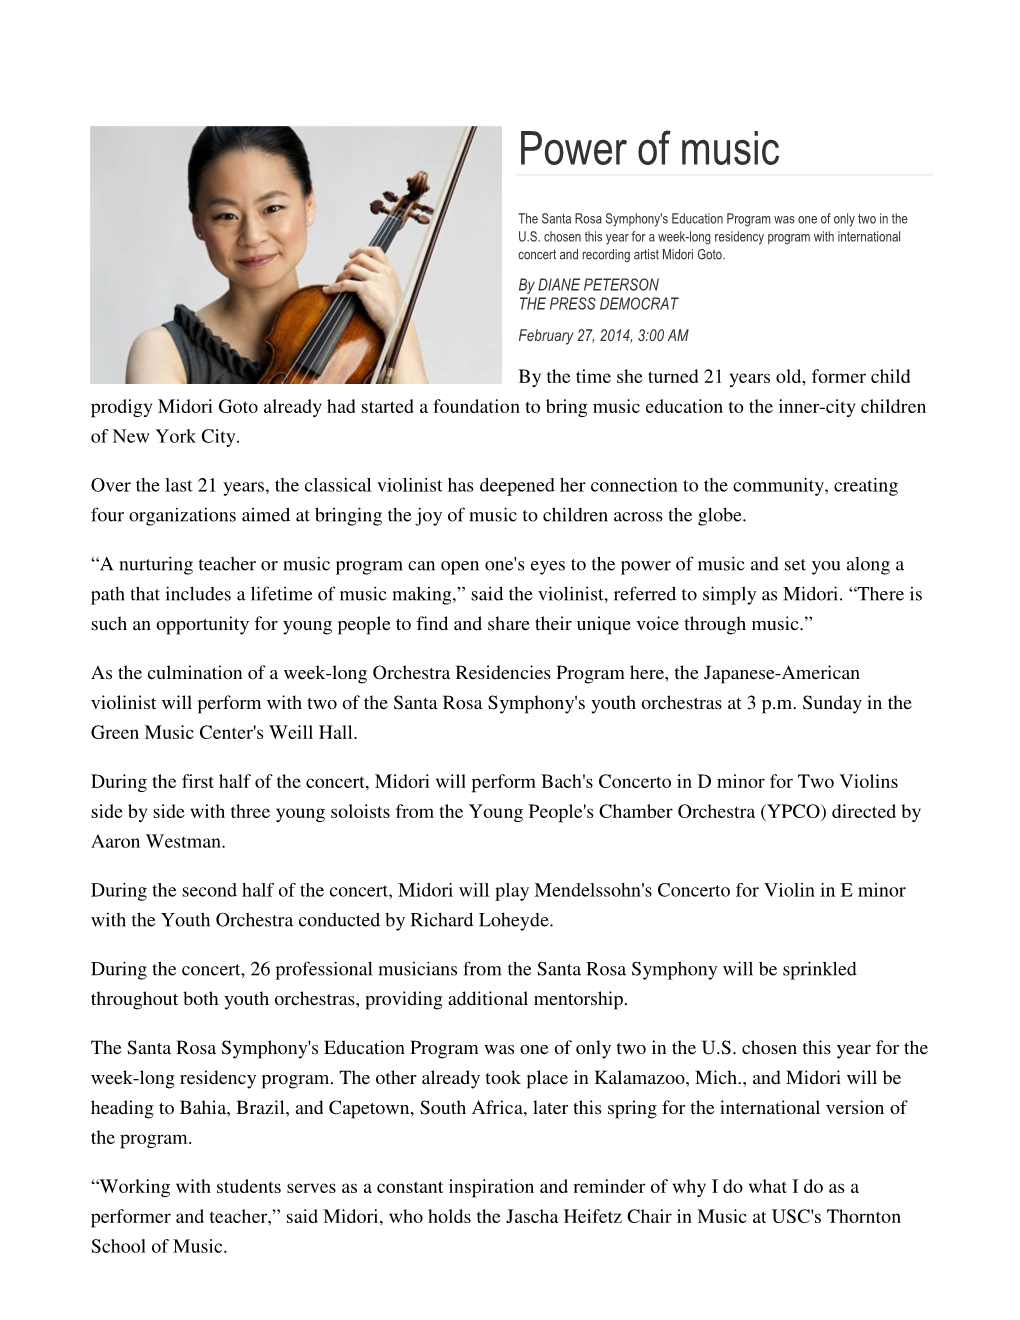 Power of Music • the Santa Rosa Symphony's Education Program Was One of Only Two in the U.S